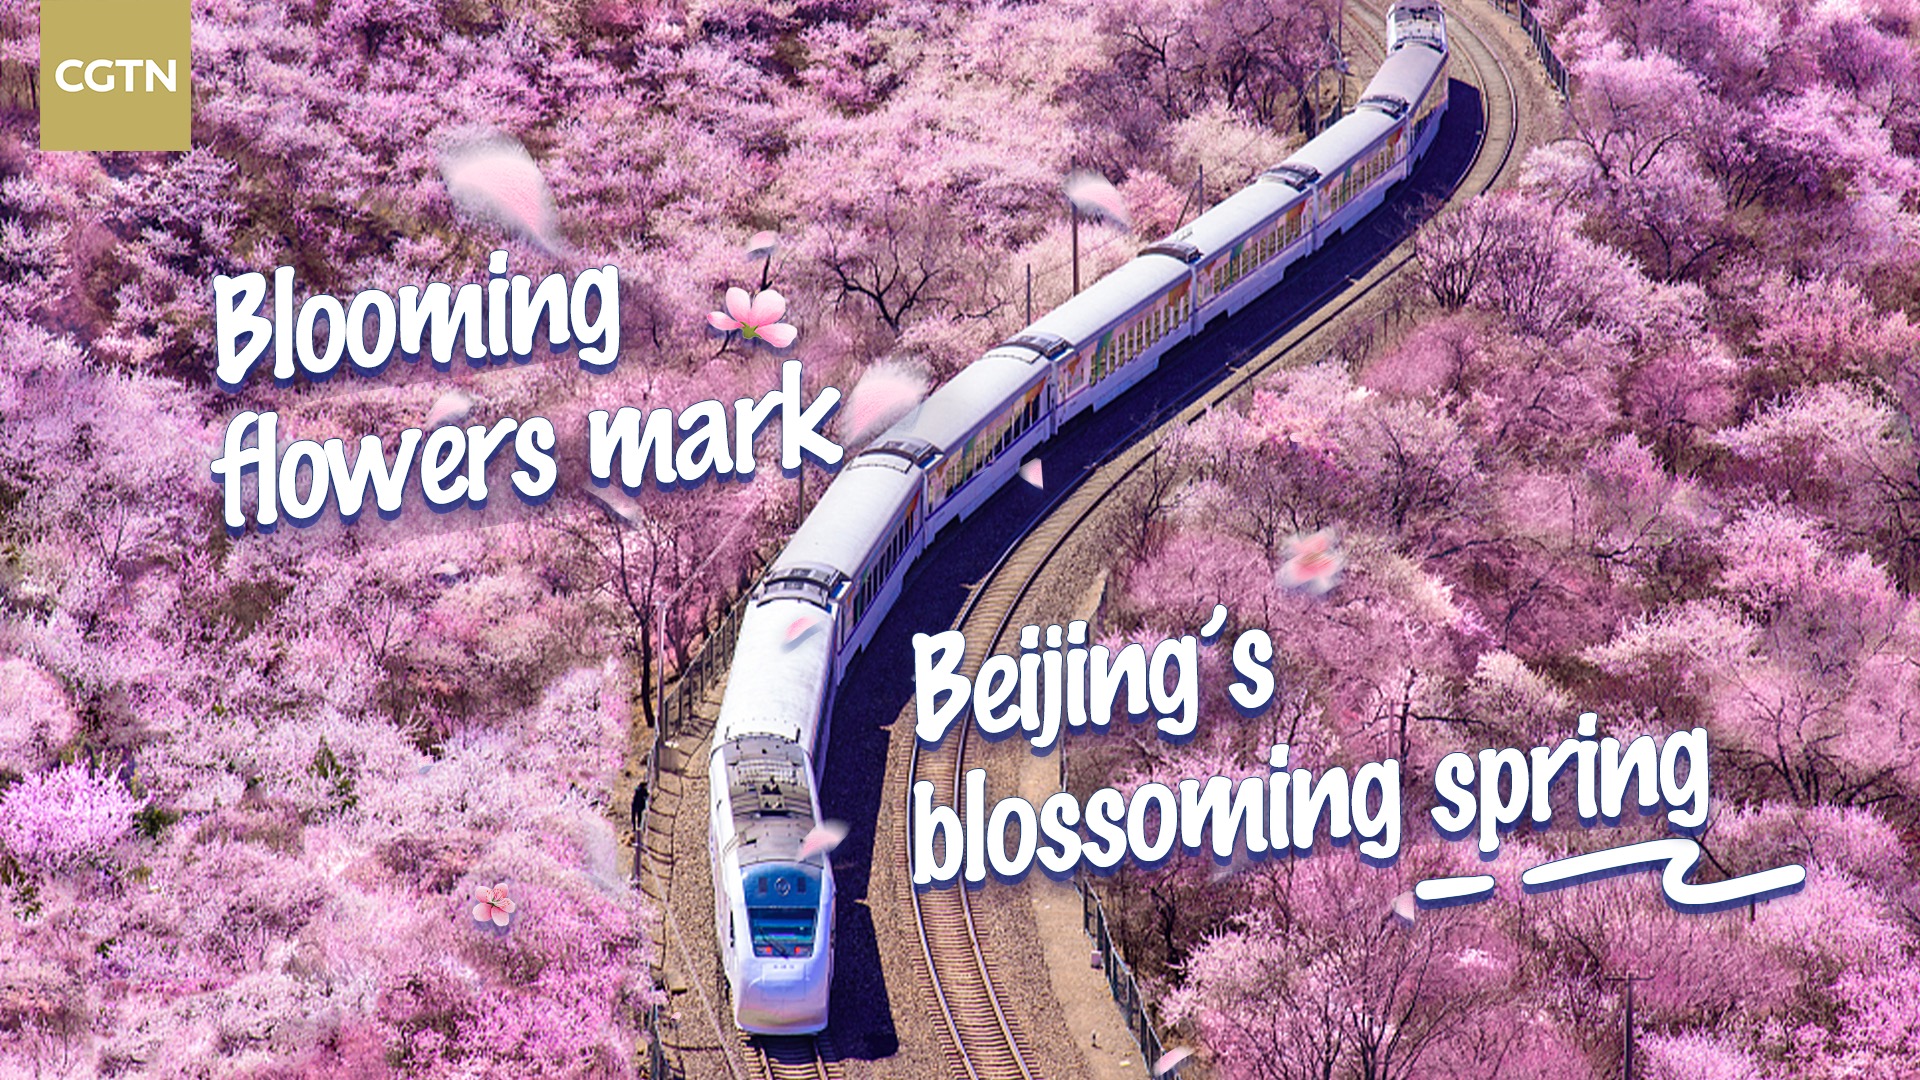 Live: Blooming flowers mark Beijing's blossoming spring